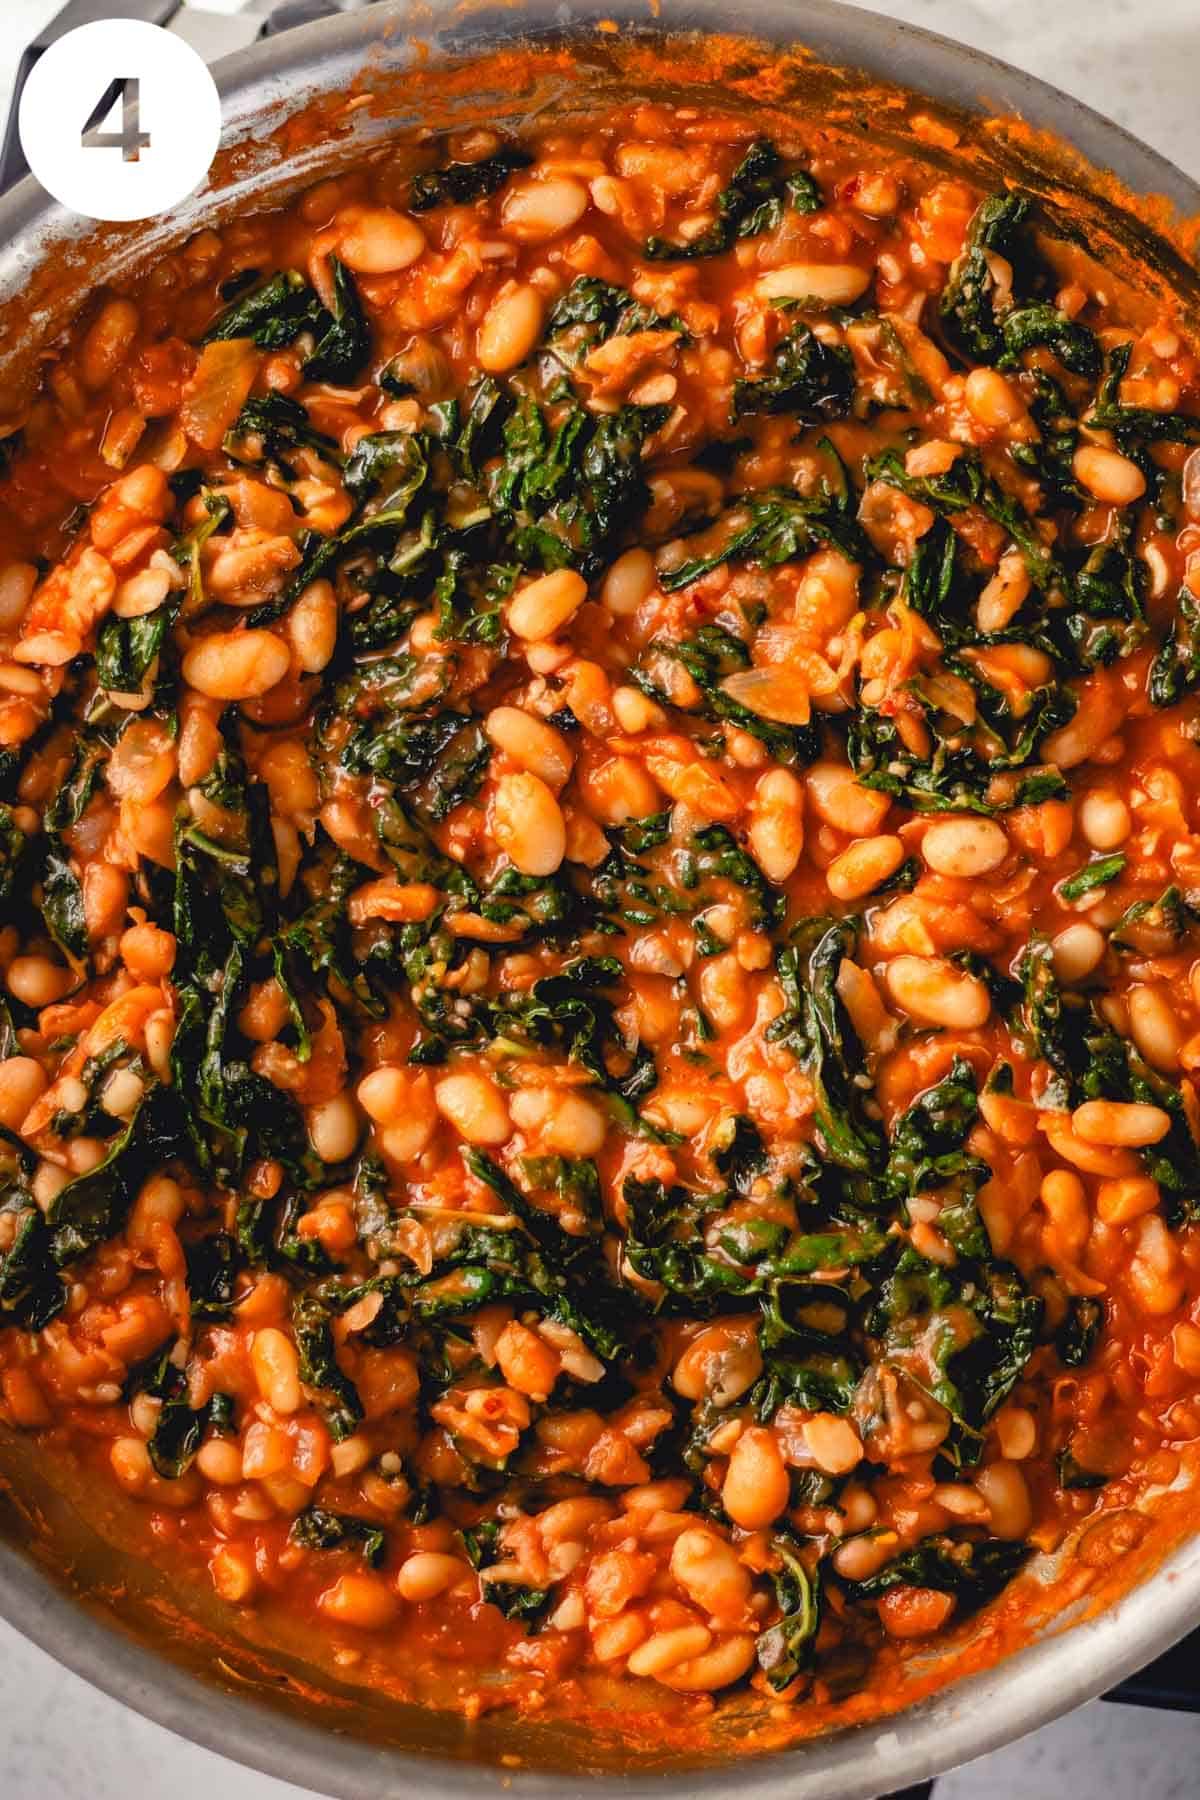 Skillet of white beans and greens in tomato sauce after the liquid has reduced and the cheese and lemon juice are stirred in. There is a number "4" in the upper left corner.